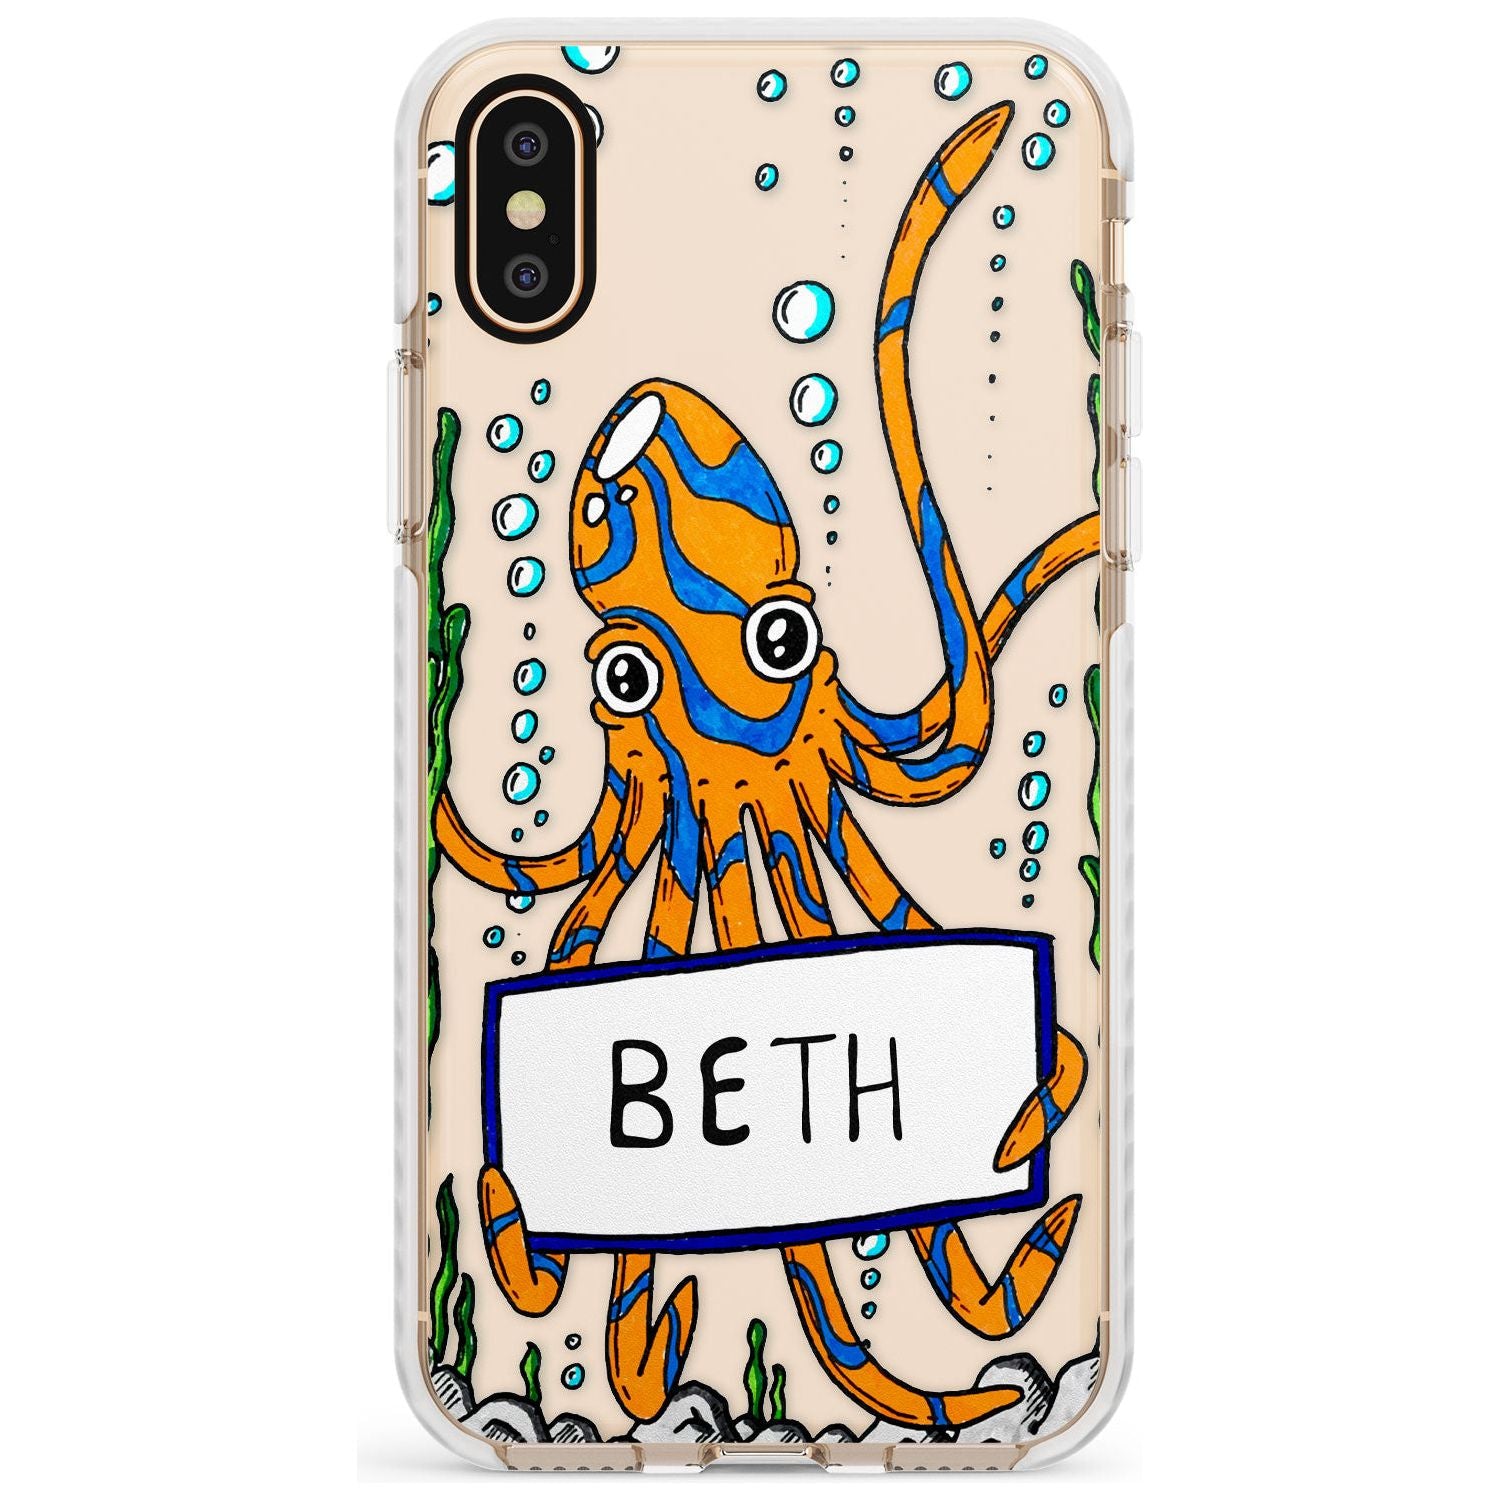 Personalised Custom Octo Impact Phone Case for iPhone X XS Max XR